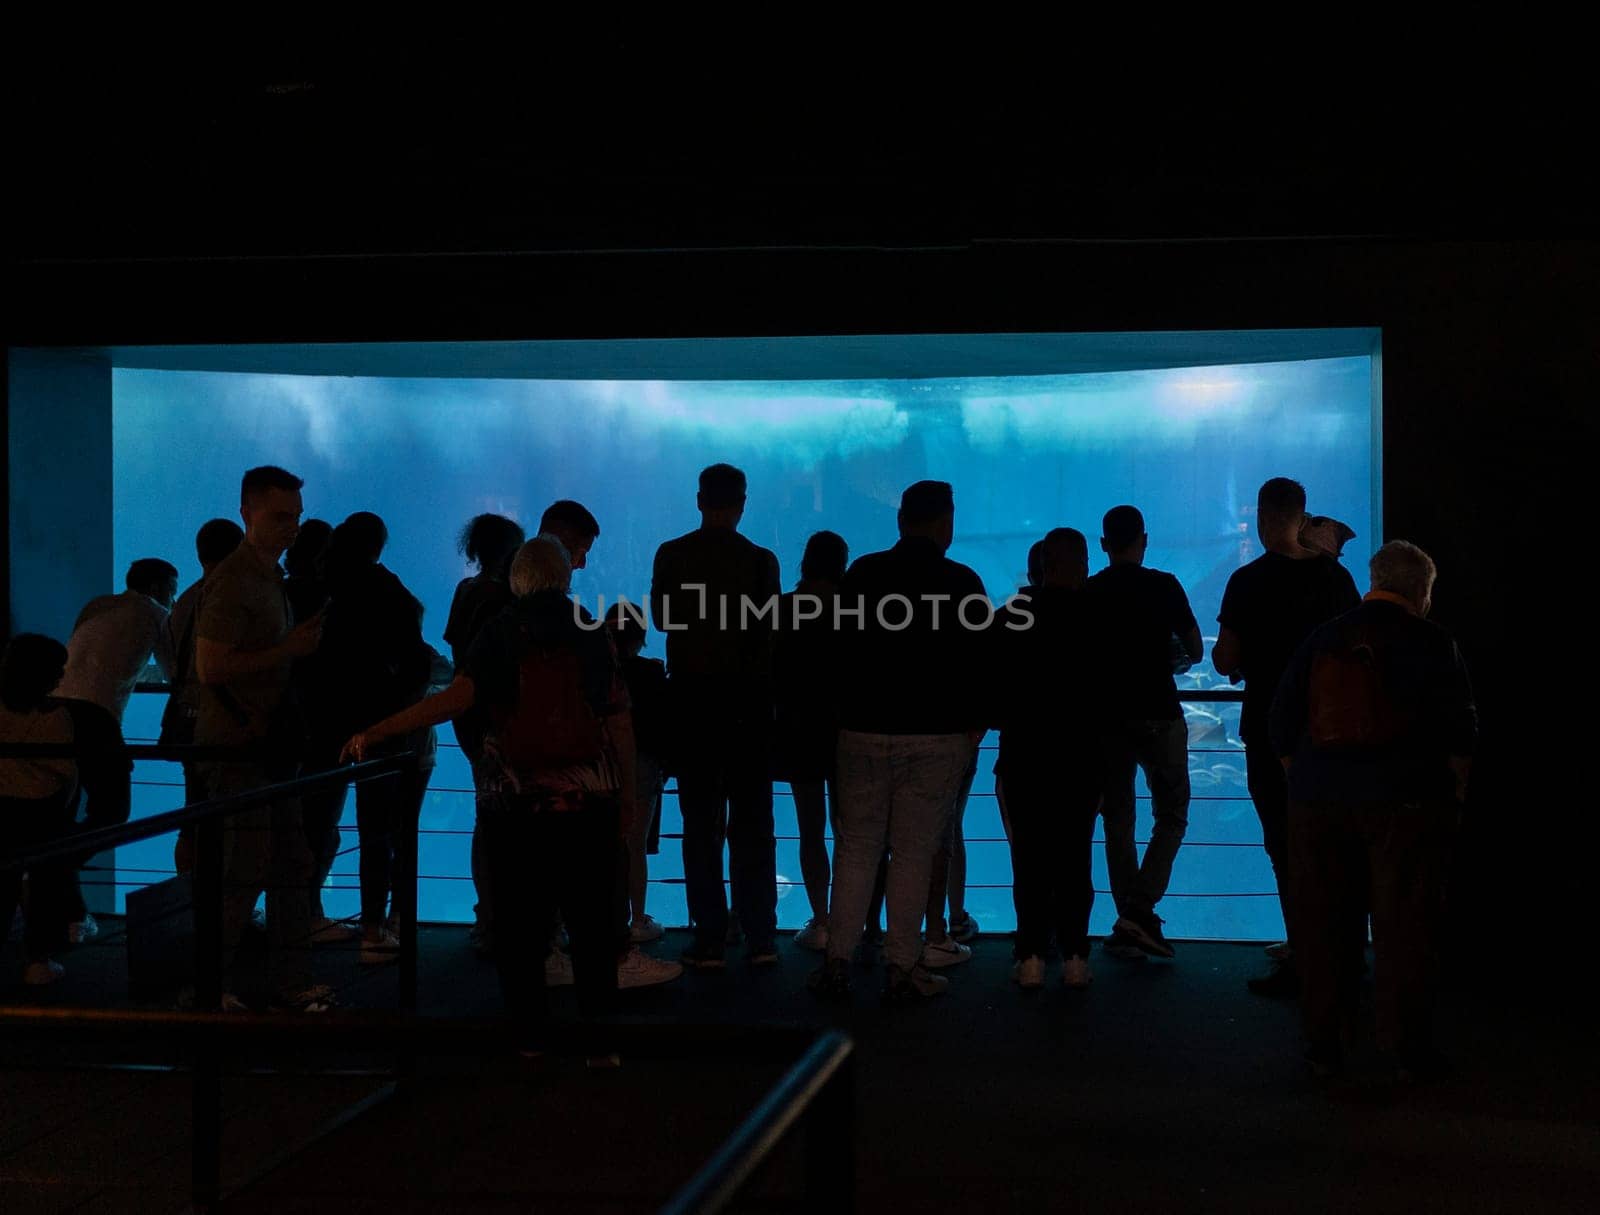 Silhouette - a of people are standing in front of a large aquarium. The aquarium is lit up and has a blue light. The people are looking at the aquarium and seem to be enjoying the experience